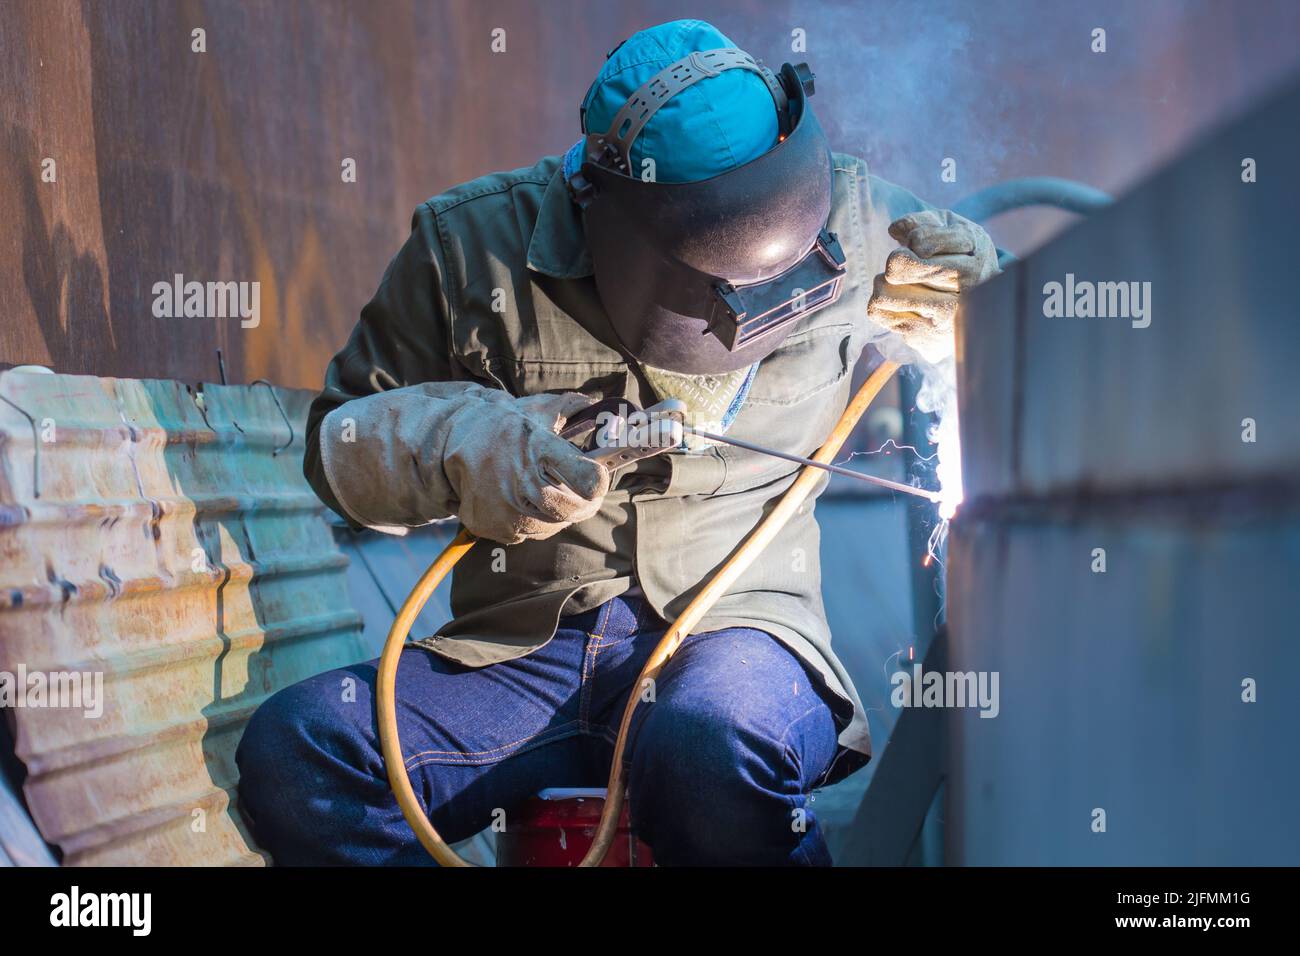 Male  worker wearing protective clothing and repair welding patition plate industrial construction oil and gas or  storage tank inside confined spaces Stock Photo